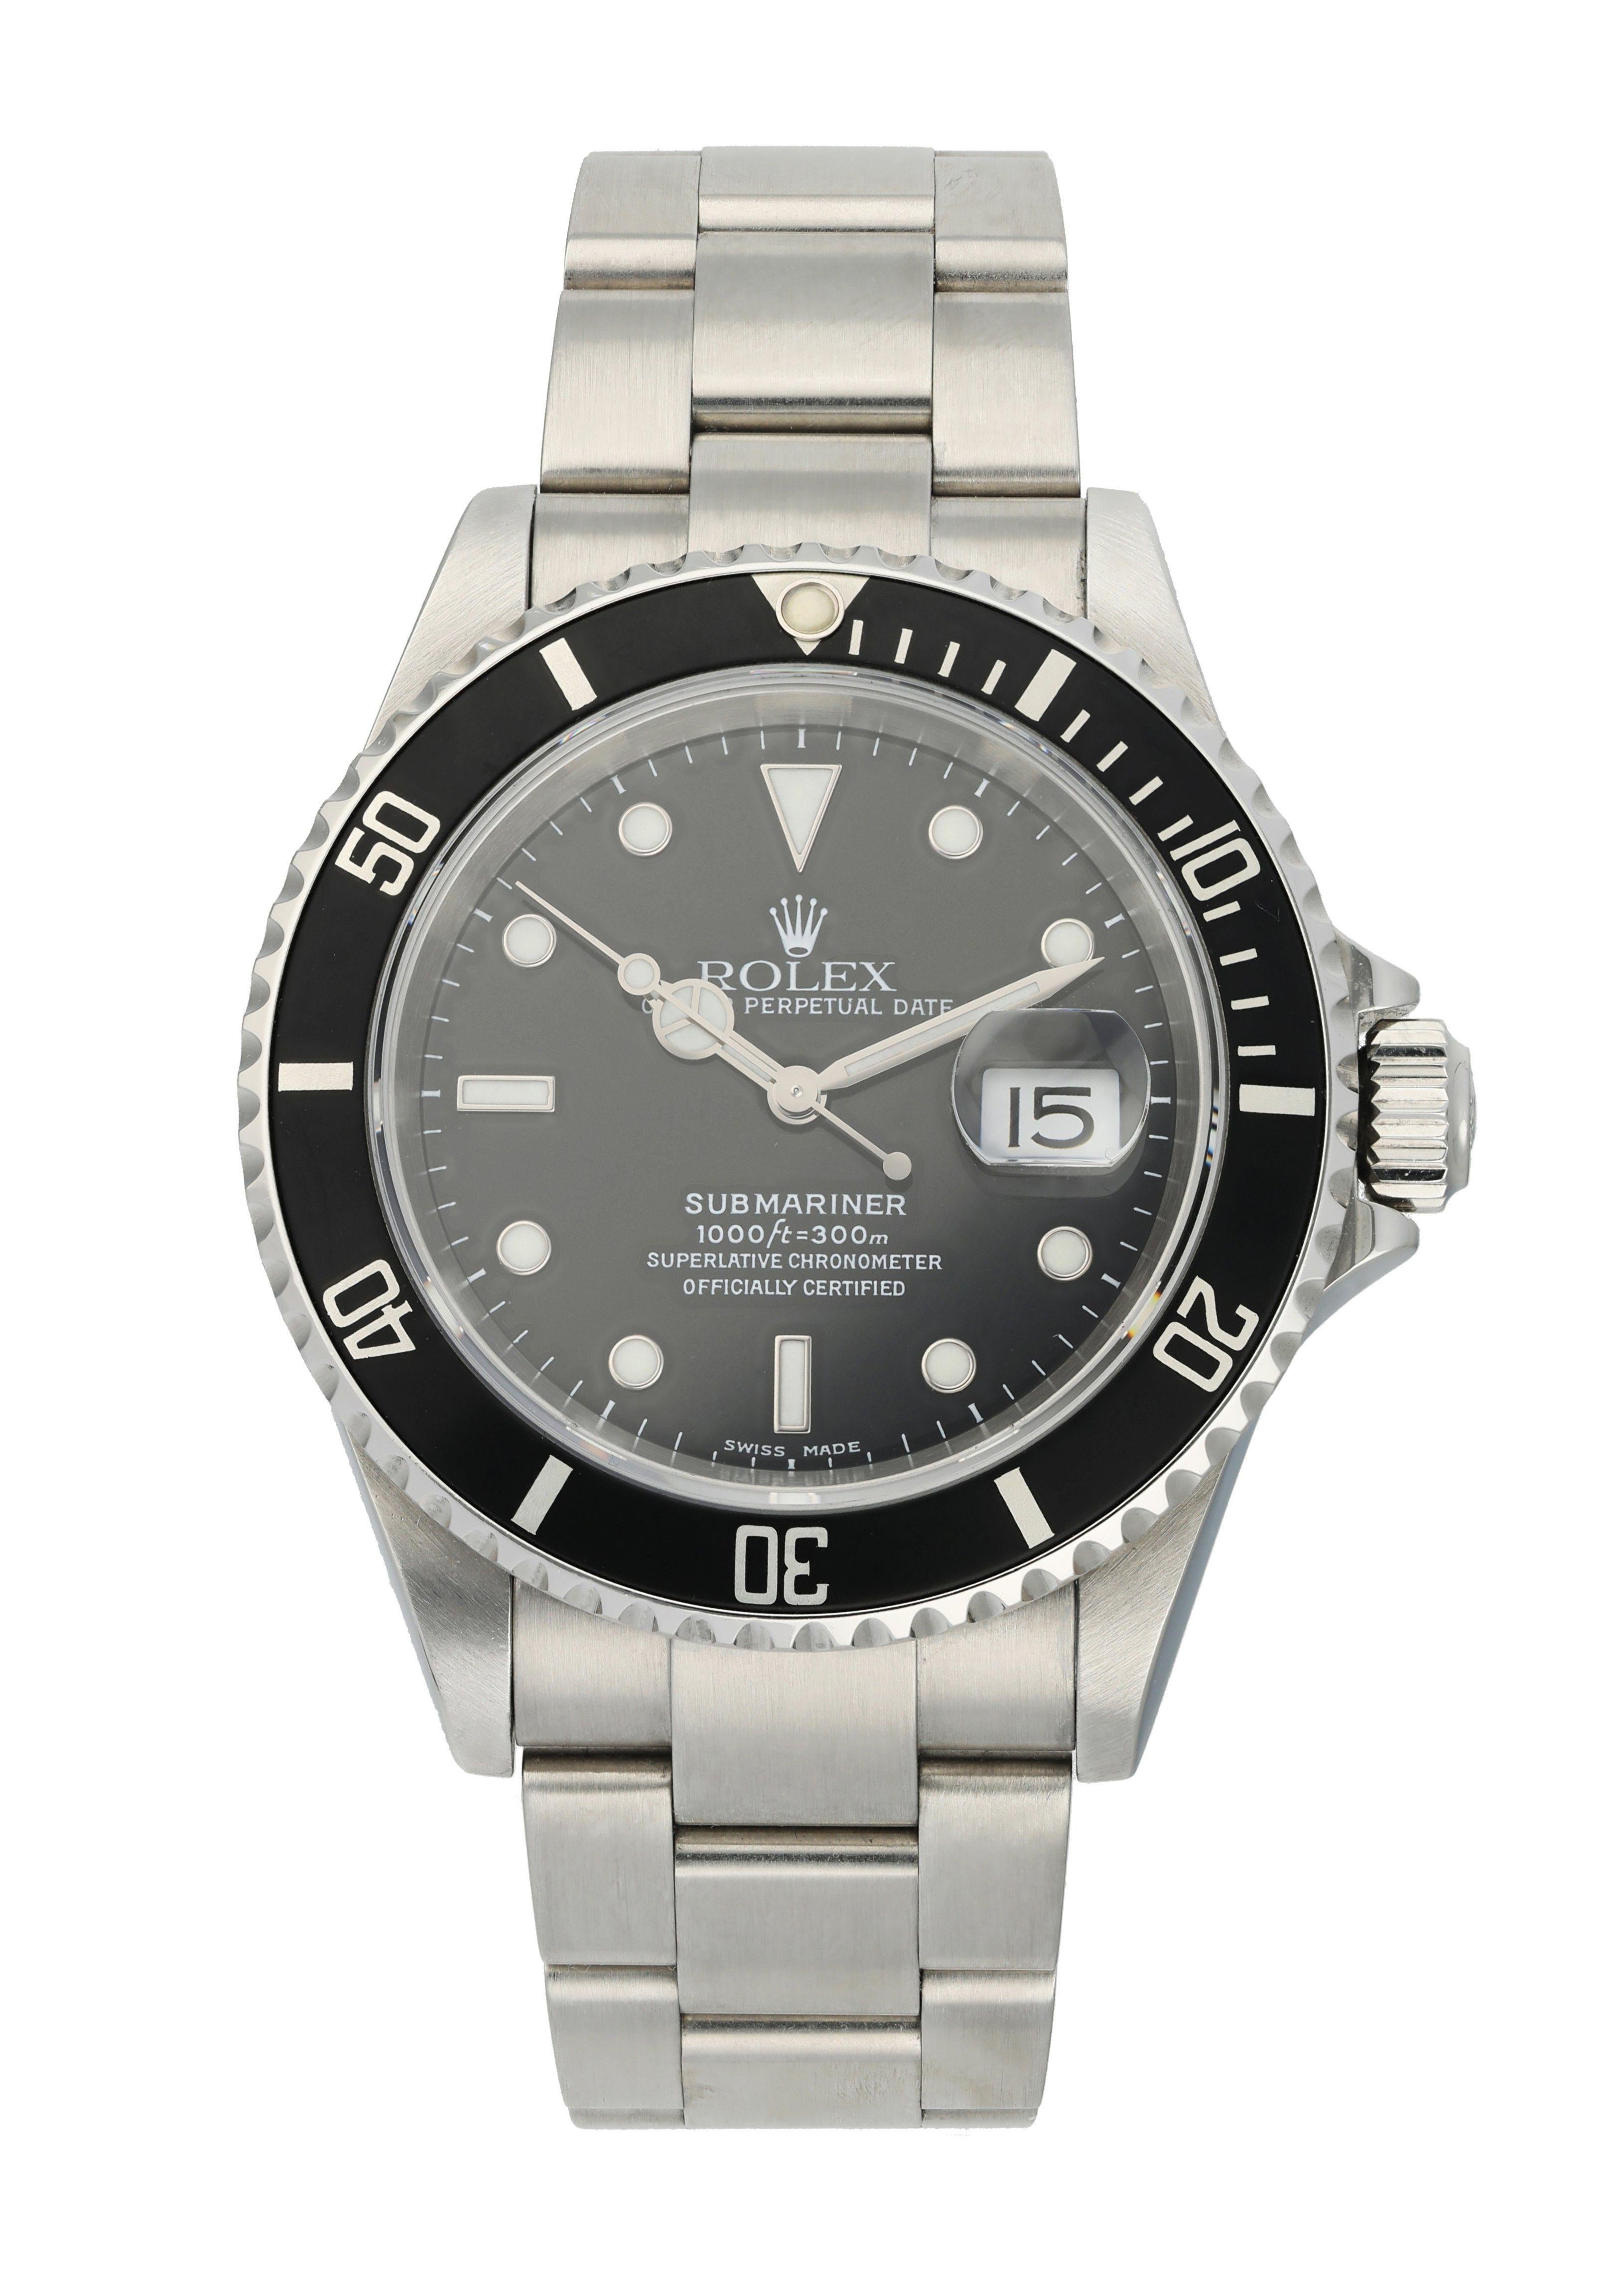 Rolex Submariner 16610 T Men's Watch. 
42mm Stainless Steel case. 
Stainless steel Stationary bezel. 
Black dial with Luminous Steel hands and luminous dot hour markers. 
Minute markers on the outer dial. 
Date display at the 3 o'clock position.